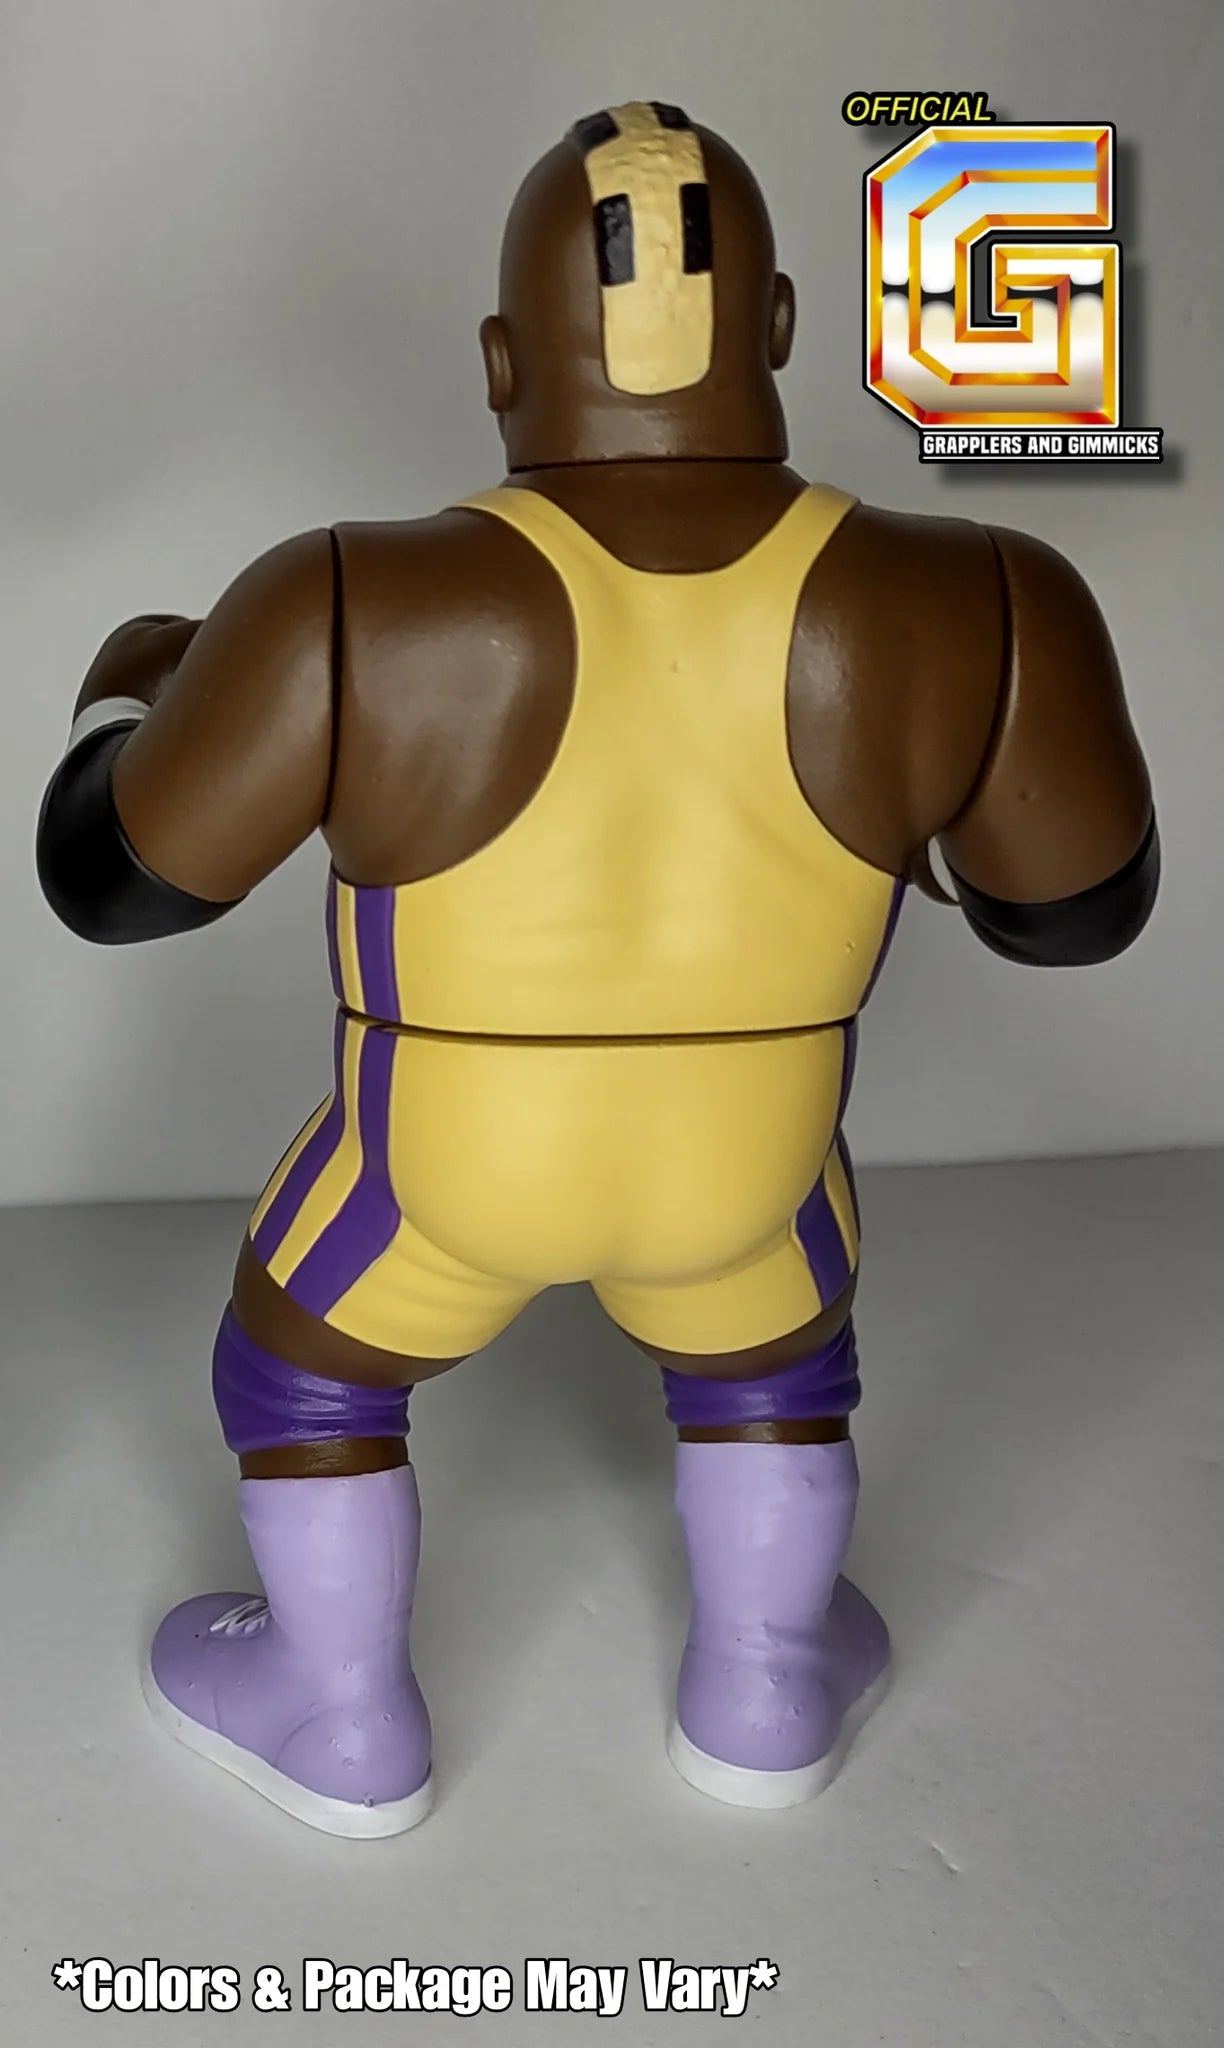 2023 Hasttel Toy Grapplers & Gimmicks Series 2 Bobby Horne [Mo]